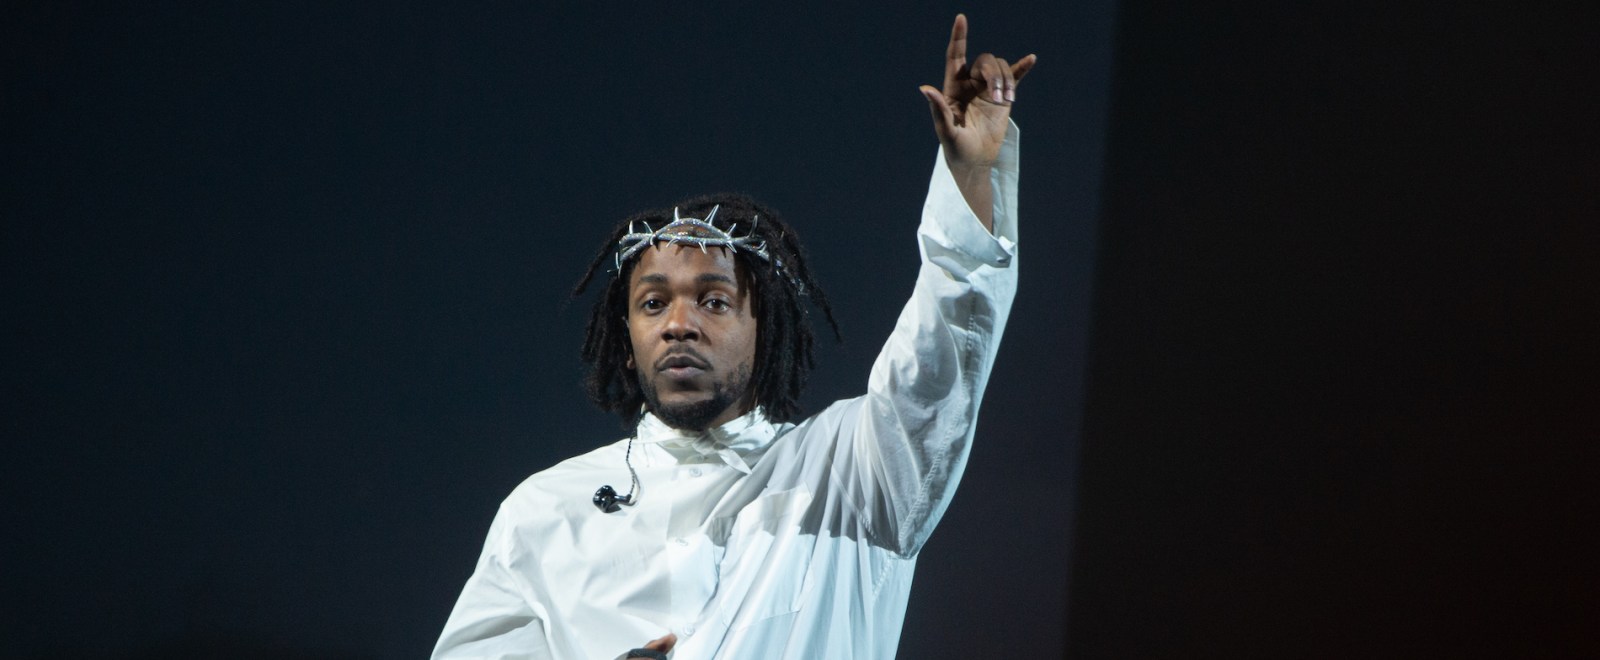 How Much is Your Outfit? Kendrick Lamar at Glastonbury Festival